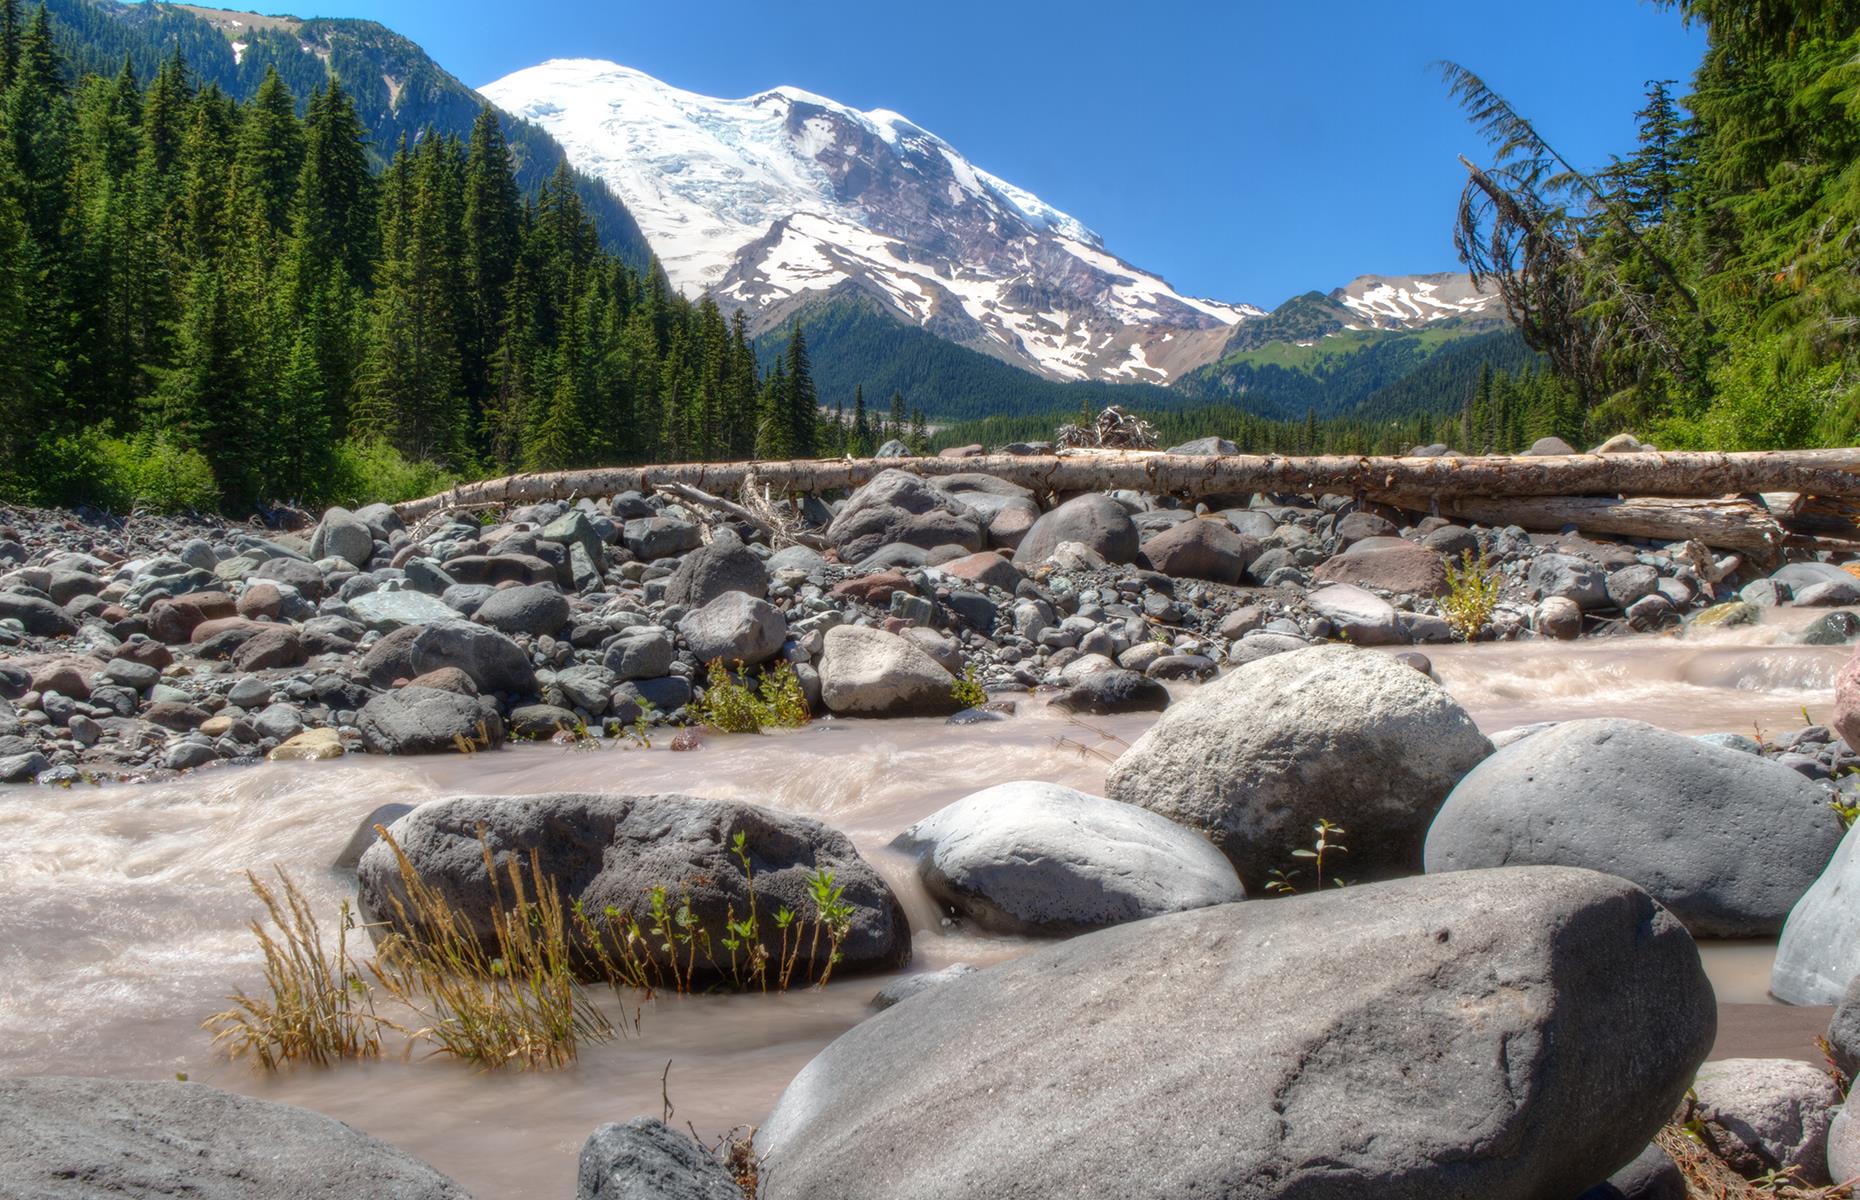 <p>Taking over an idyllic spot in the northeast of Mount Rainier National Park, <a href="https://visitrainier.com/white-river-campground/">White River Campground</a> rests at a dizzying 4,232 feet (1,290m). Facilities at the camp are basic: there are restrooms but no showers, and RV sites are non-electric. But the sheer awe of your surroundings will likely make up for that. The park is close to trails such as the Glacier Basin route, which spools from the campsite towards the breathtaking Inter Glacier (<a href="https://www.nps.gov/mora/index.htm">the NPS website</a> has details on closures and protocols here).</p>